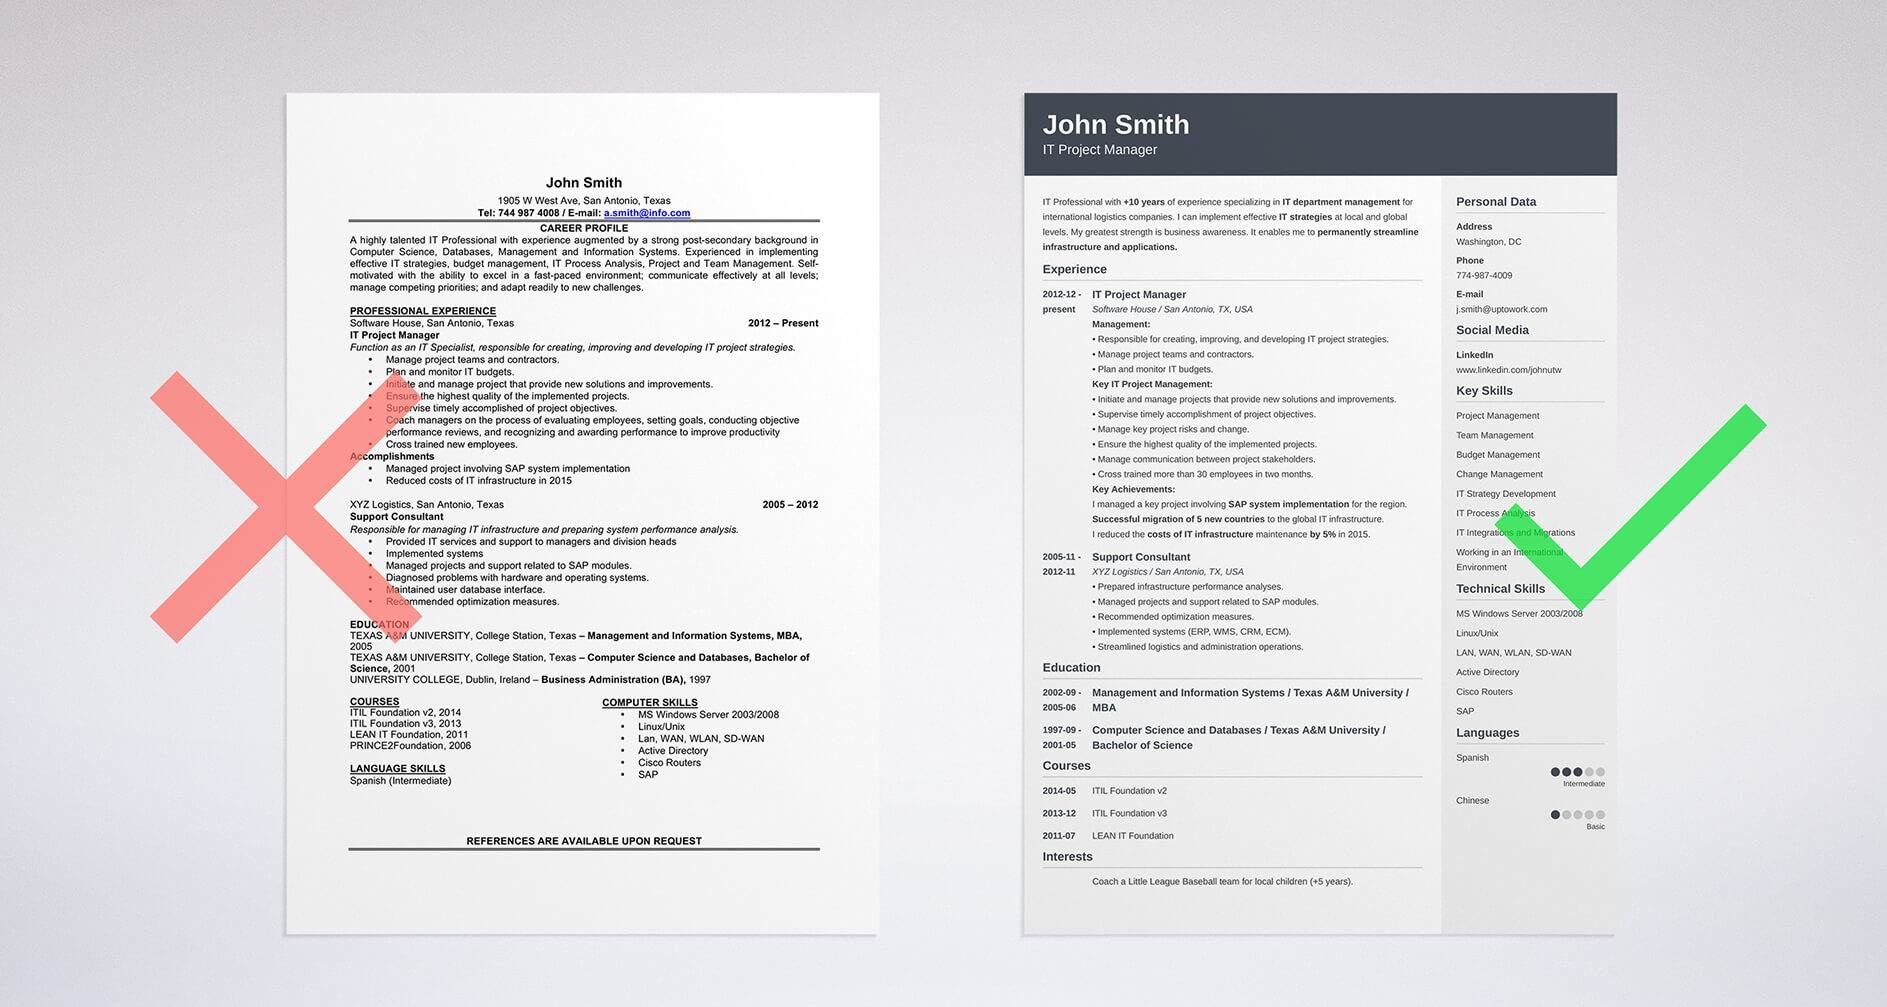 Email when Sending A Requested Resume Sample How to Email A Resume to An Employer: 12lancarrezekiq Email Examples